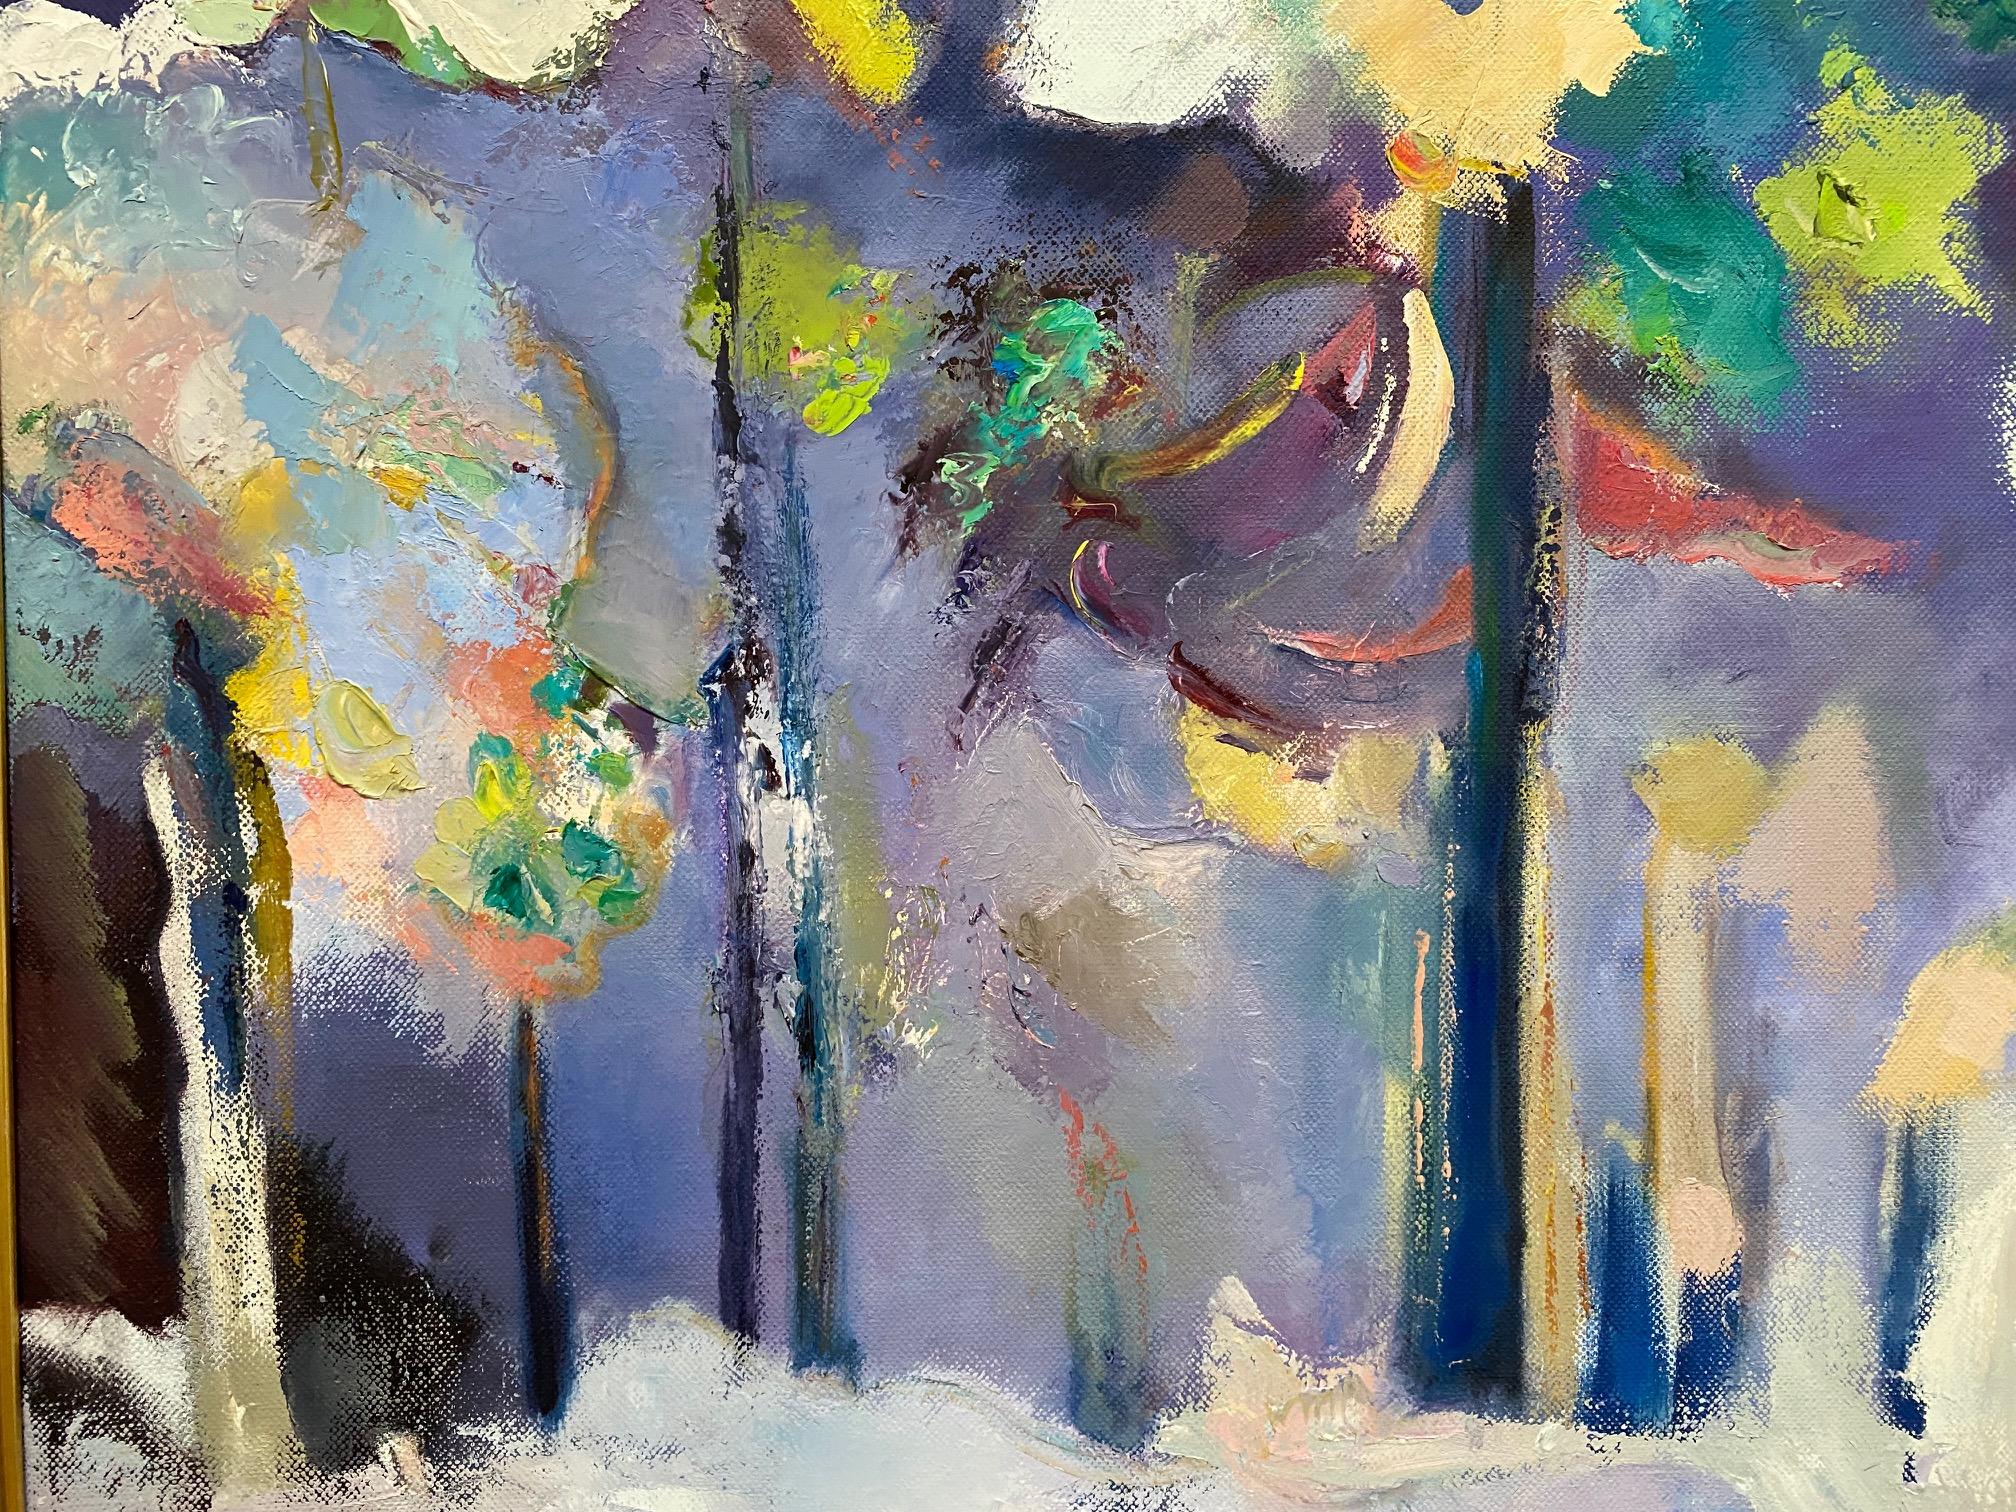 Statuesque trees in a range of lush colors surveille the grounds as blankets of snow protect  a potpourri of free form elements in an abstract expressionist winter wonderland landscape. Internationally trending artist Carol Carpenter's modern